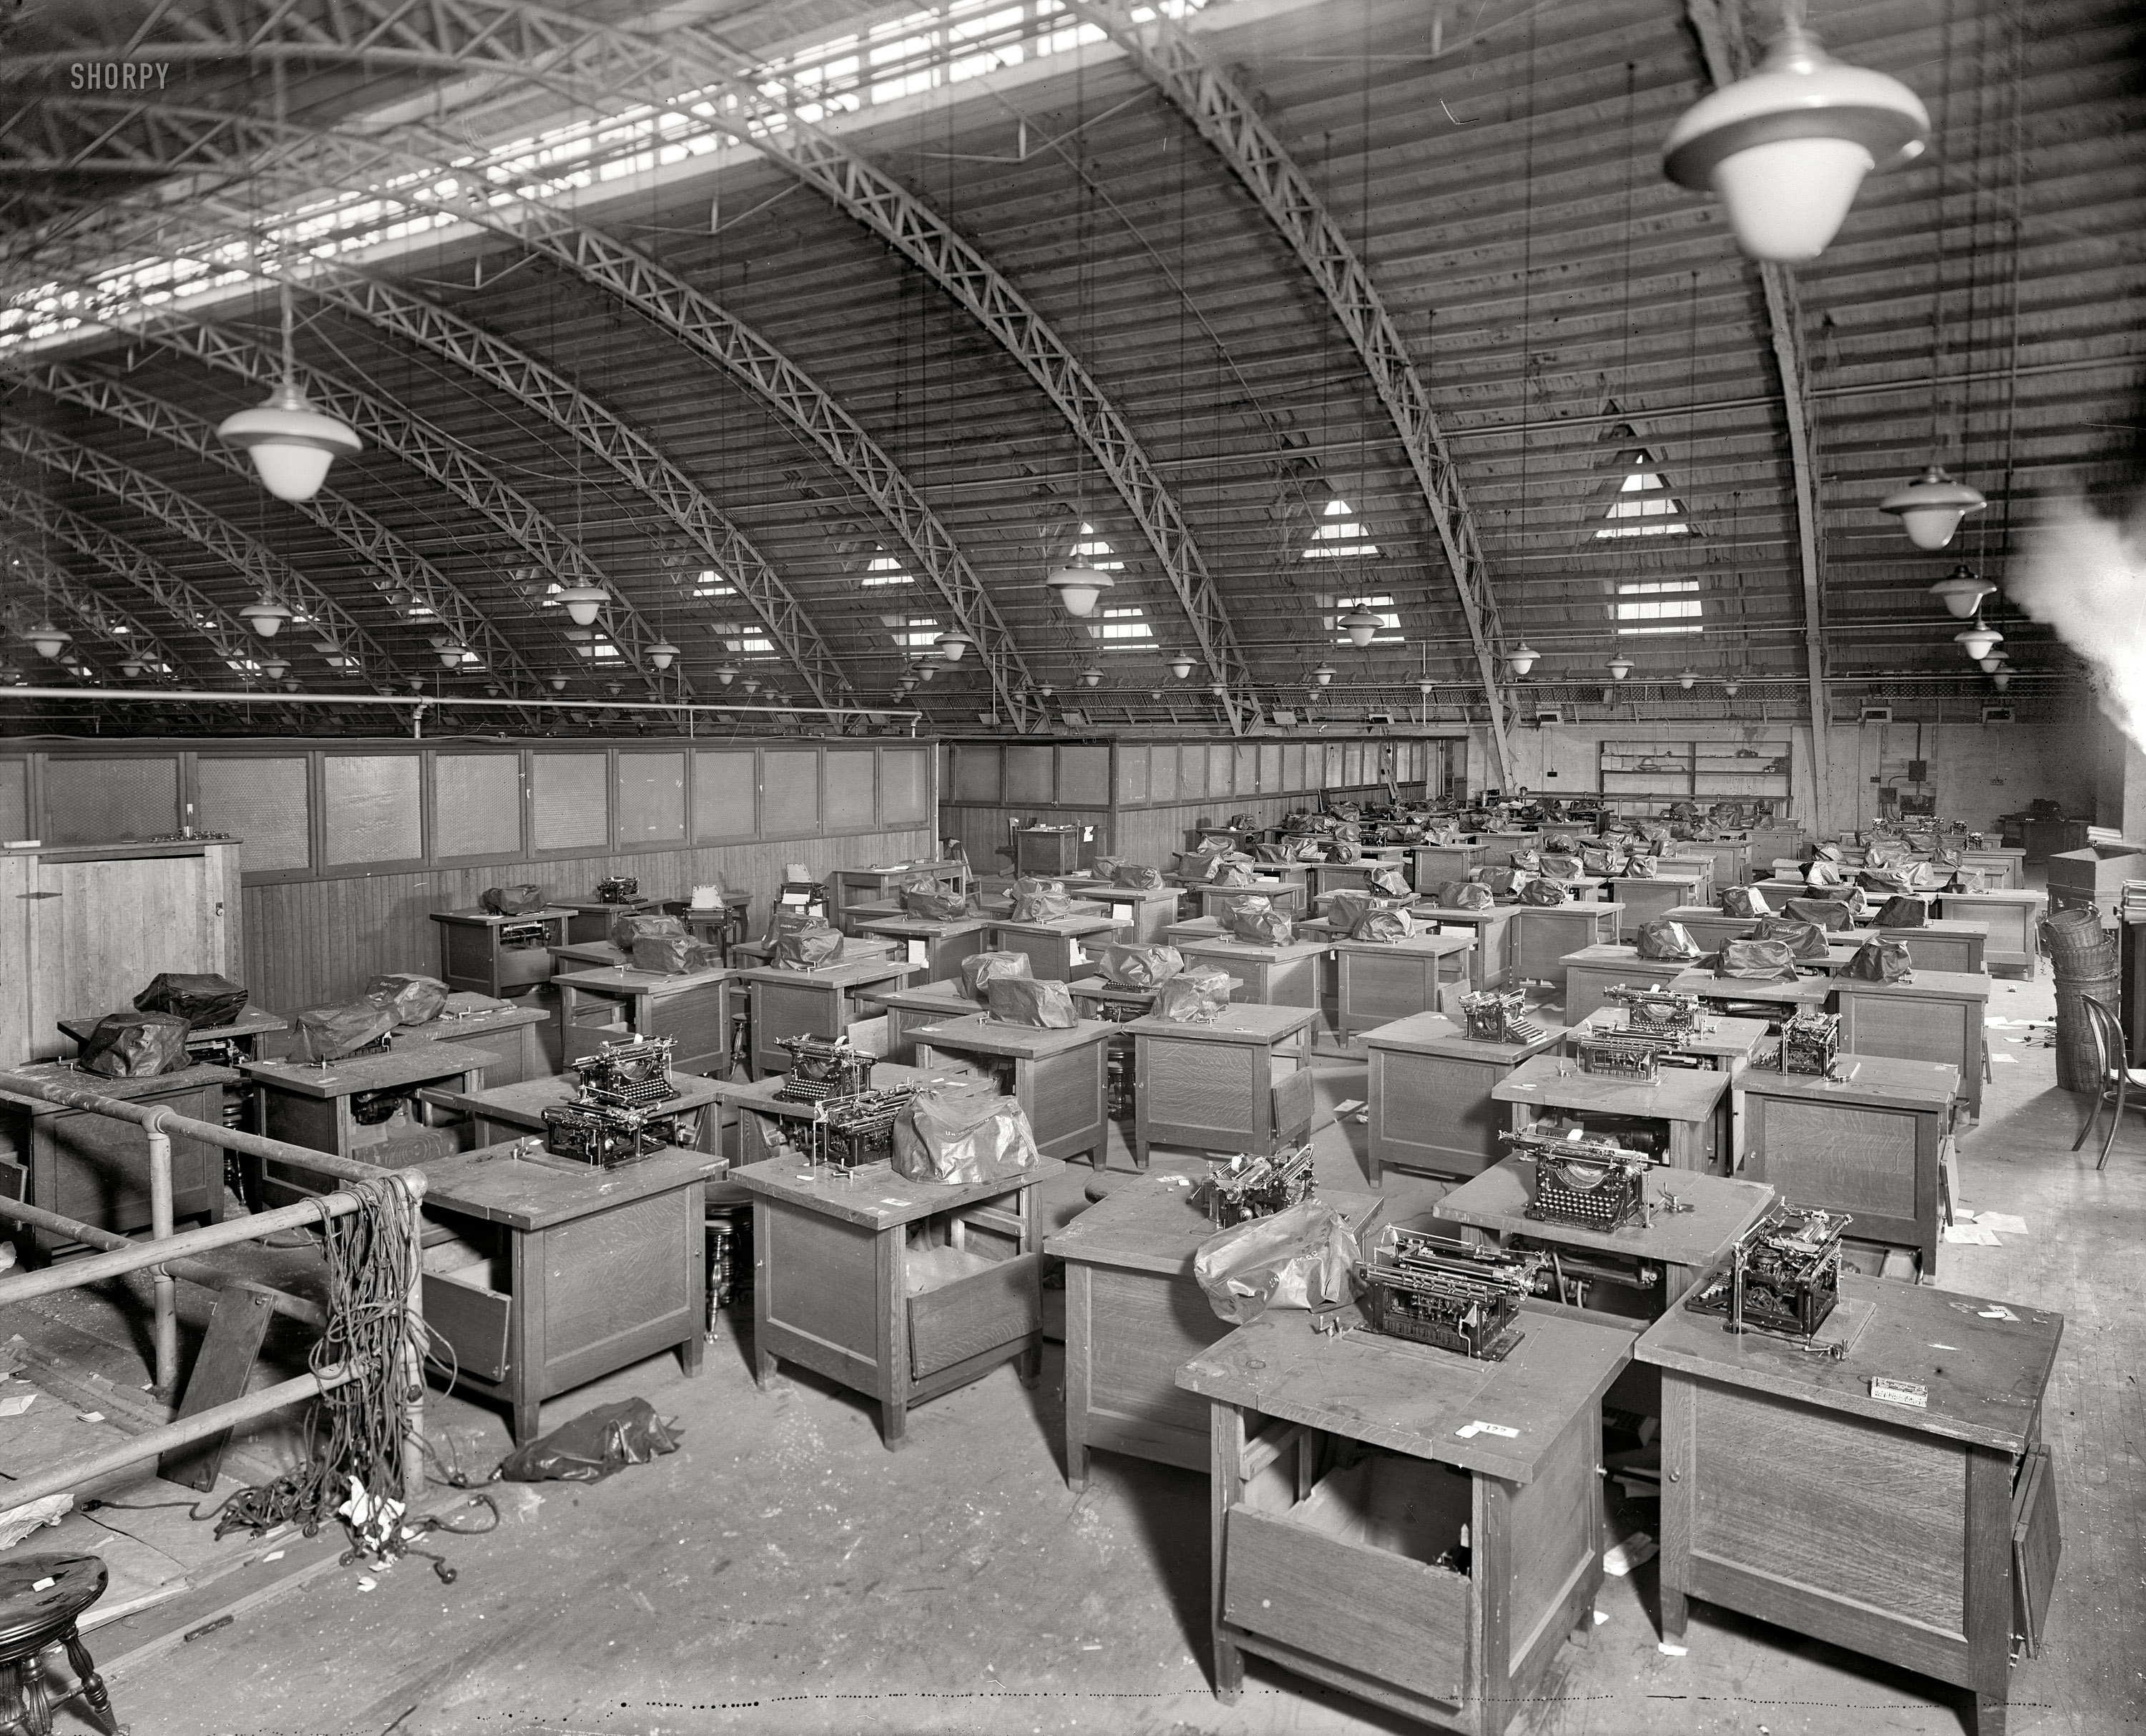 Washington, D.C., circa 1920. "Democratic National Committee." The convention hall in the old Liberty Market. Harris & Ewing glass negative. View full size.